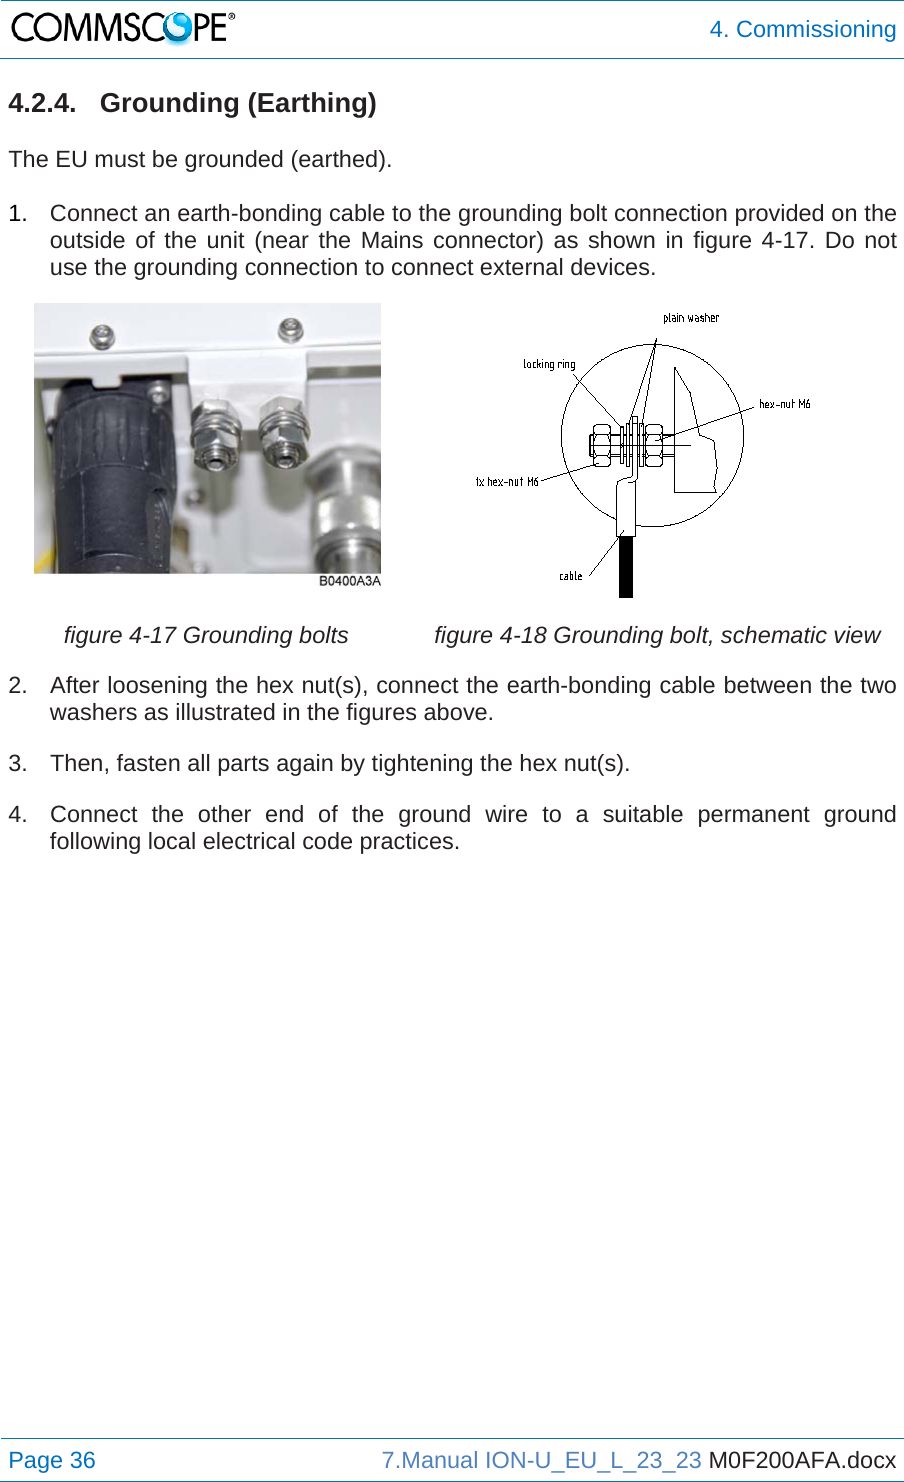  4. Commissioning Page 36  7.Manual ION-U_EU_L_23_23 M0F200AFA.docx  4.2.4. Grounding (Earthing)  The EU must be grounded (earthed).  1.  Connect an earth-bonding cable to the grounding bolt connection provided on the outside of the unit (near the Mains connector) as shown in figure 4-17. Do not use the grounding connection to connect external devices.  figure 4-17 Grounding bolts  figure 4-18 Grounding bolt, schematic view 2.  After loosening the hex nut(s), connect the earth-bonding cable between the two washers as illustrated in the figures above. 3.  Then, fasten all parts again by tightening the hex nut(s). 4.  Connect the other end of the ground wire to a suitable permanent ground following local electrical code practices. 